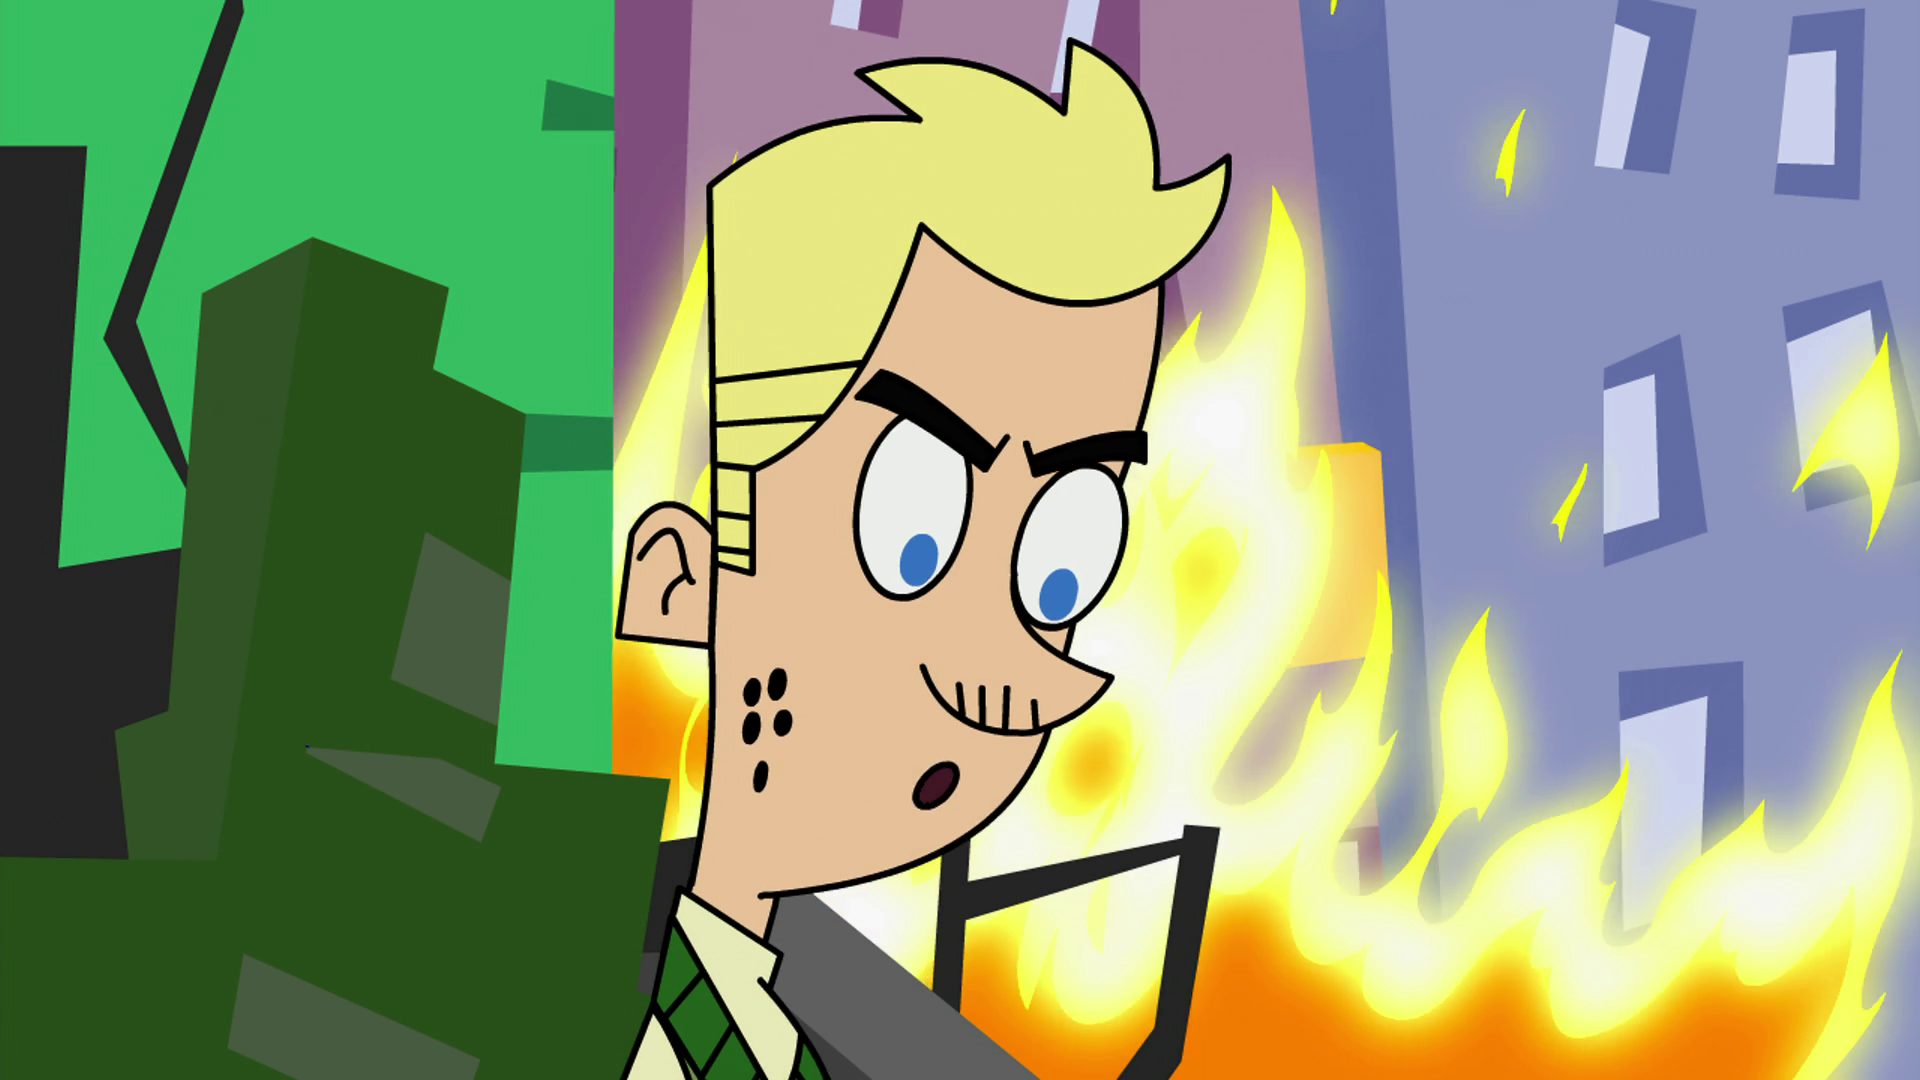 Johnny Test S04 1080p Nf Web Dl Dd5 1 X264 Alfahd 16 1 Gb Download Movies And